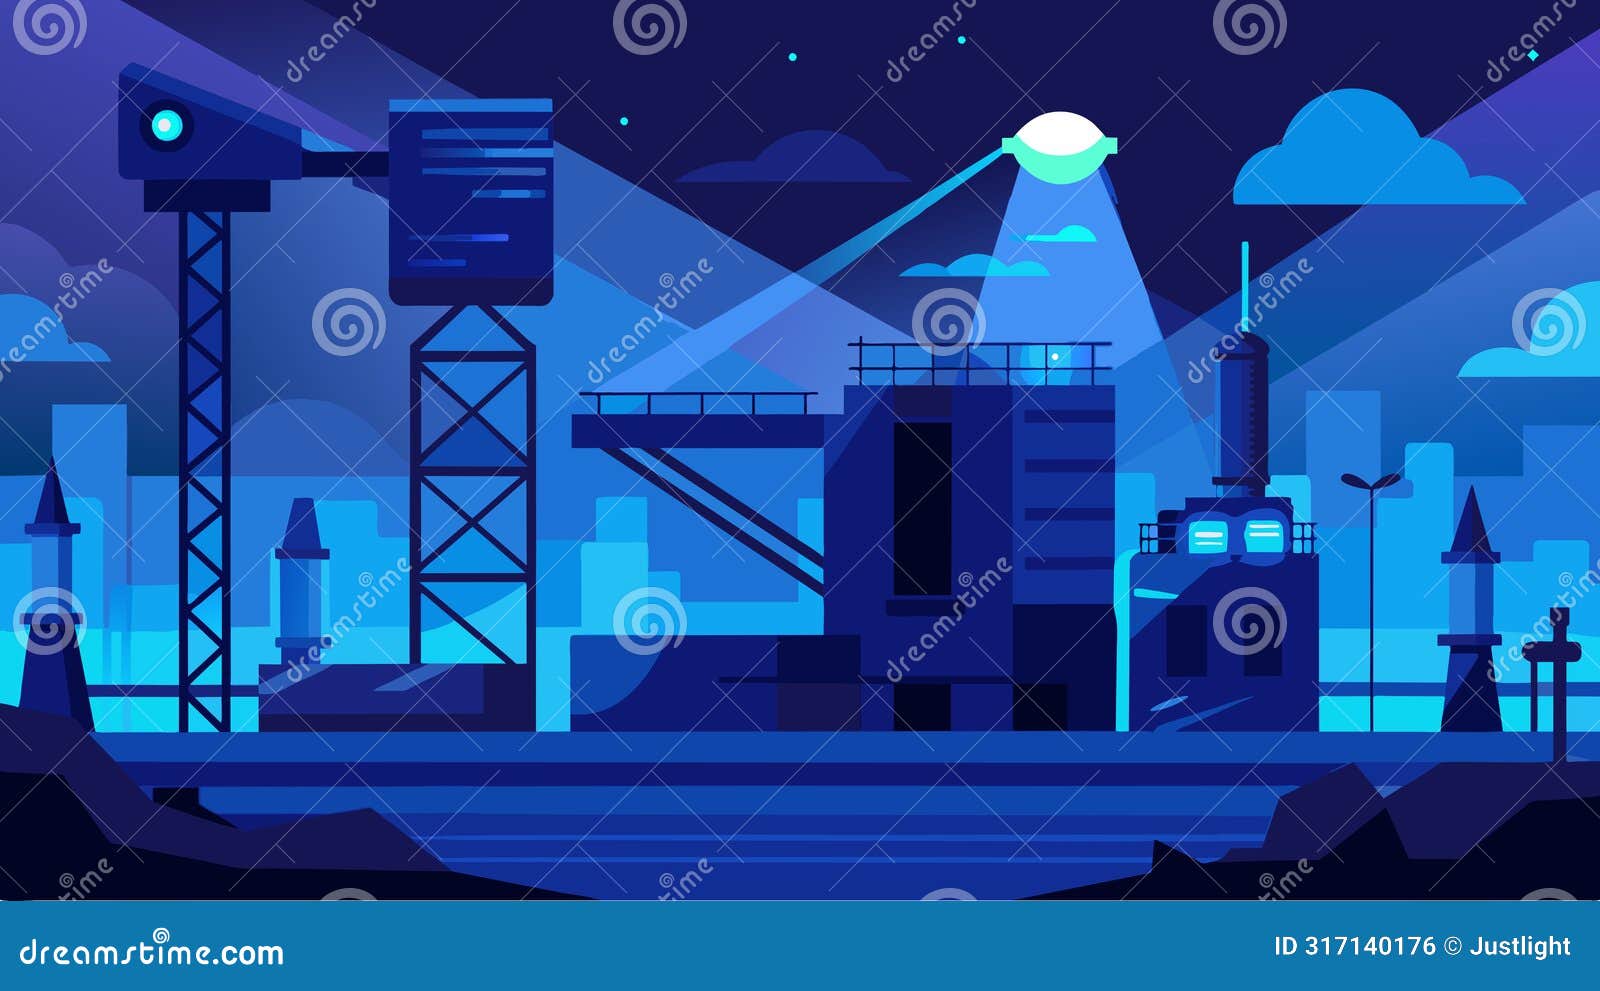 the construction site takes on a futuristic appearance at night as the bright floodlights emit a surreal blue glow on